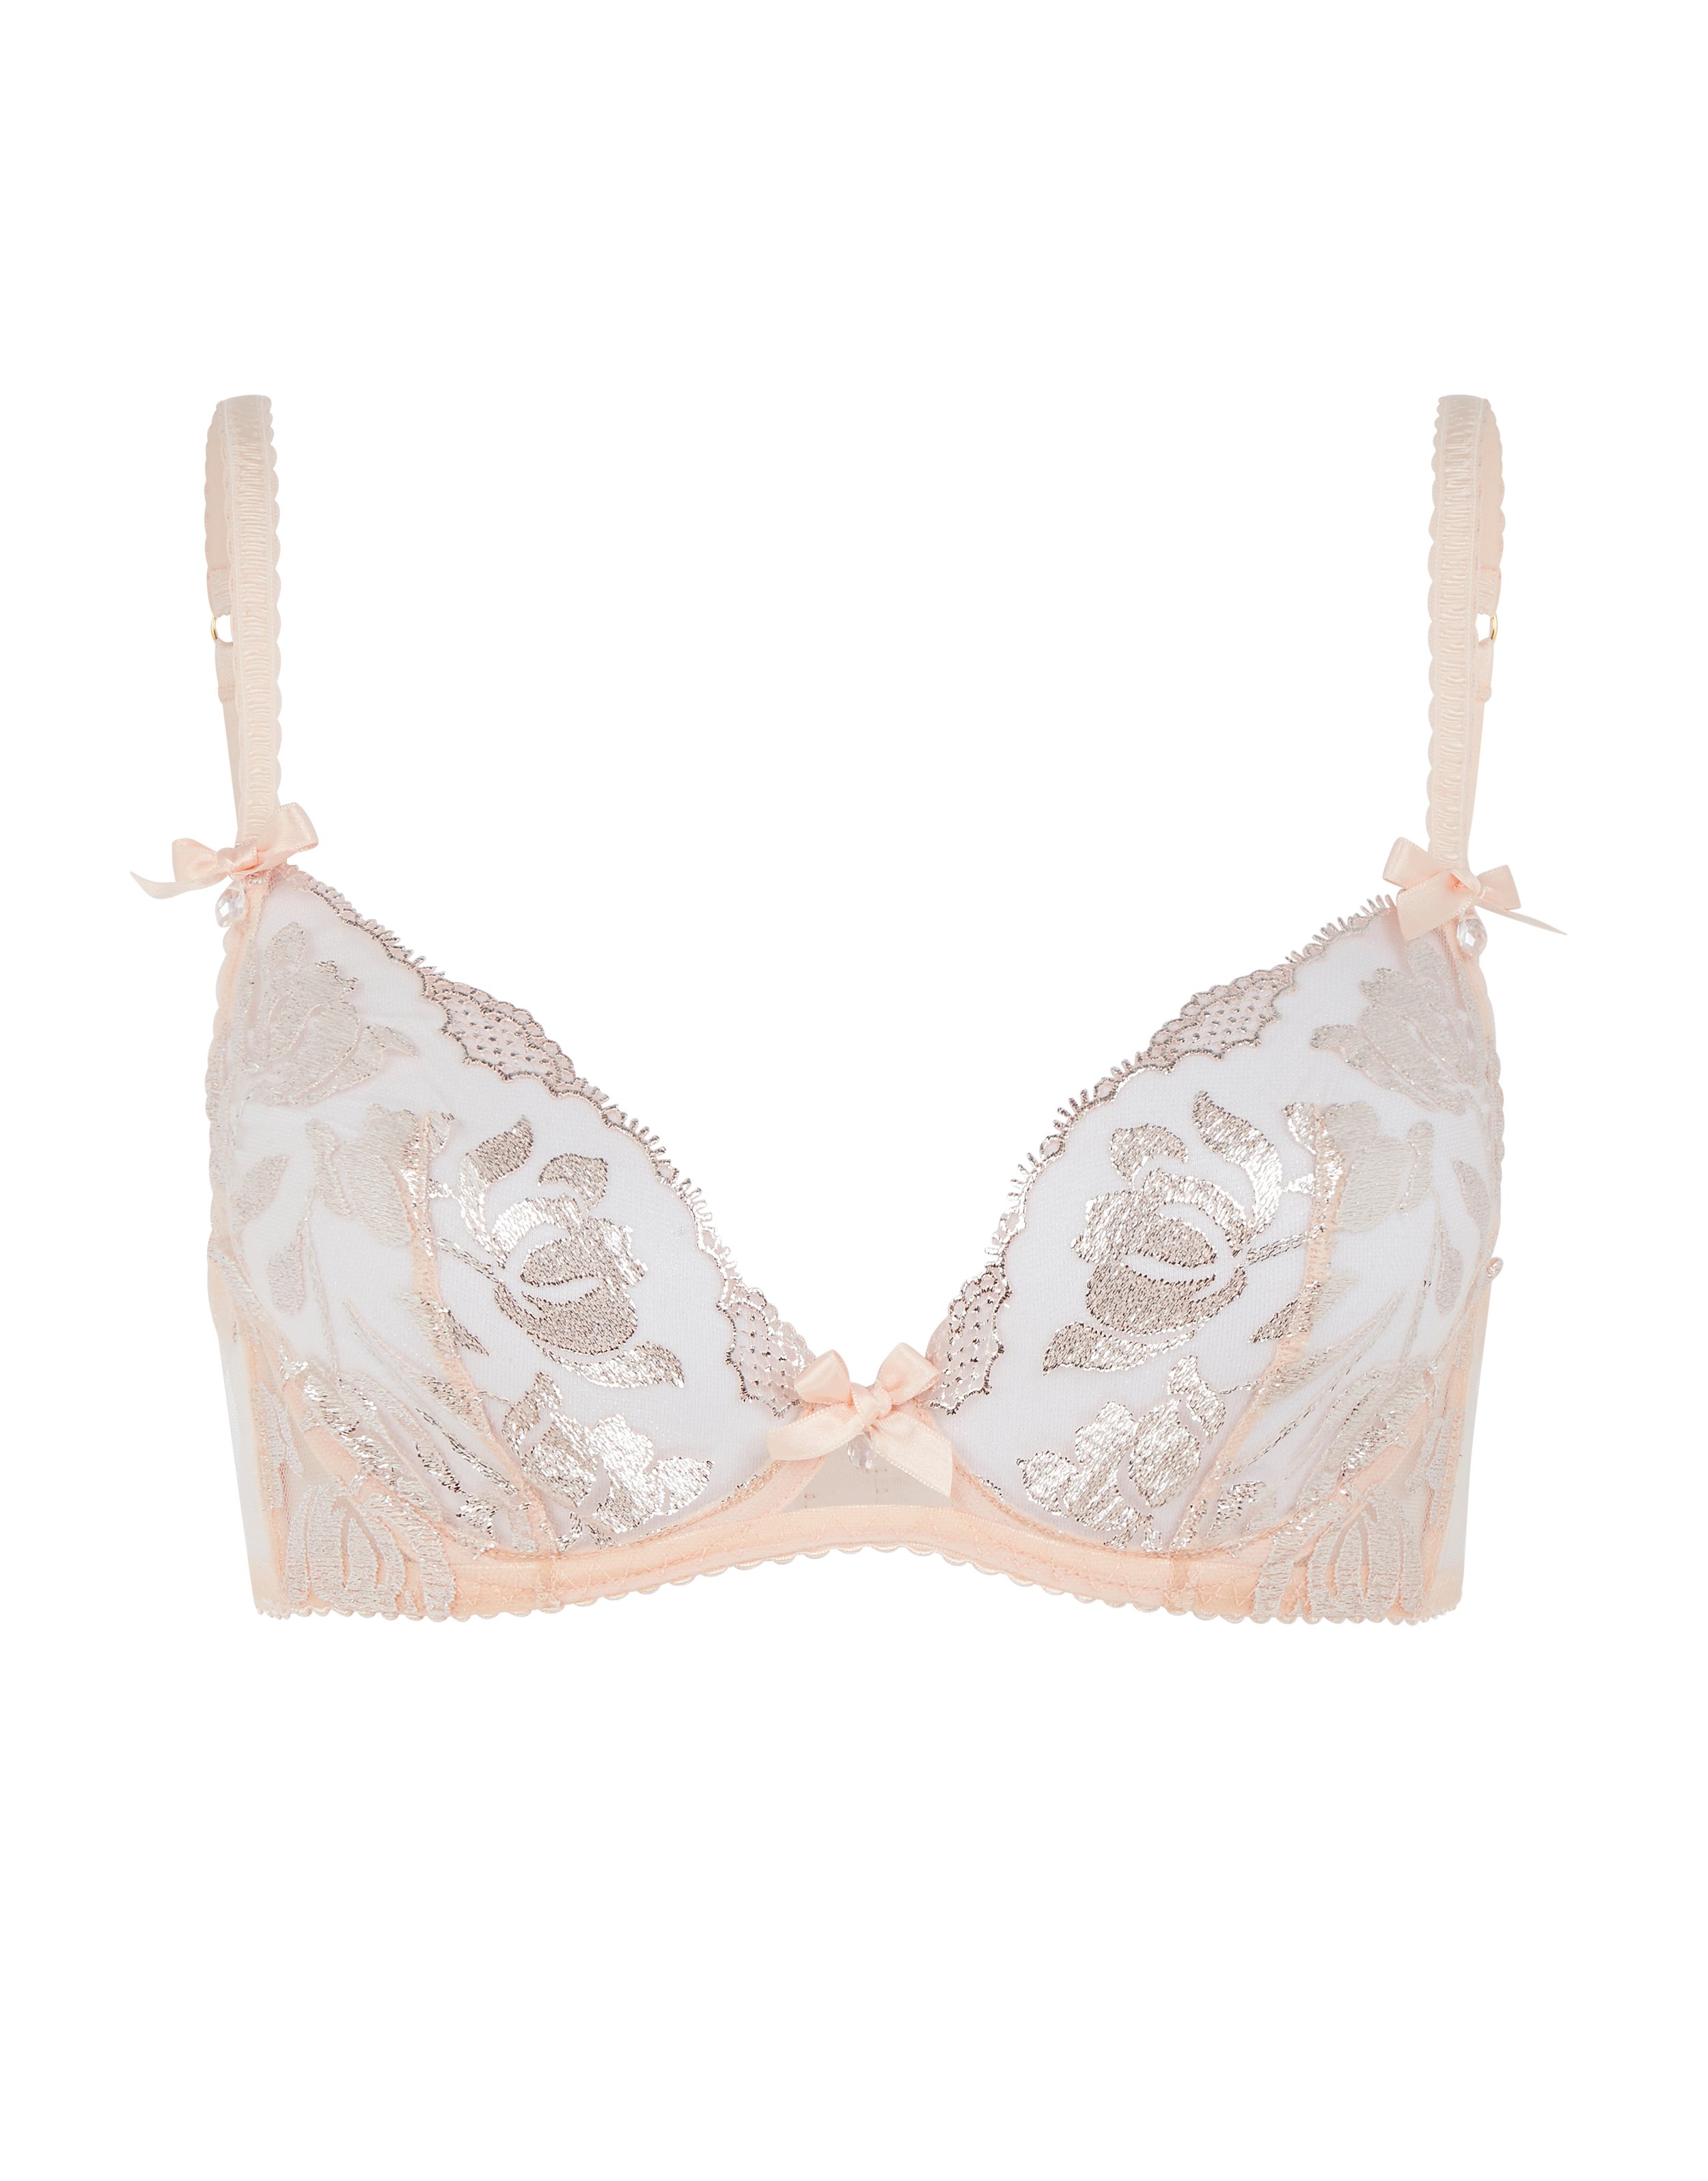 Agent Provocateur - Sparkle and Dazzle. @samantapal shimmers and